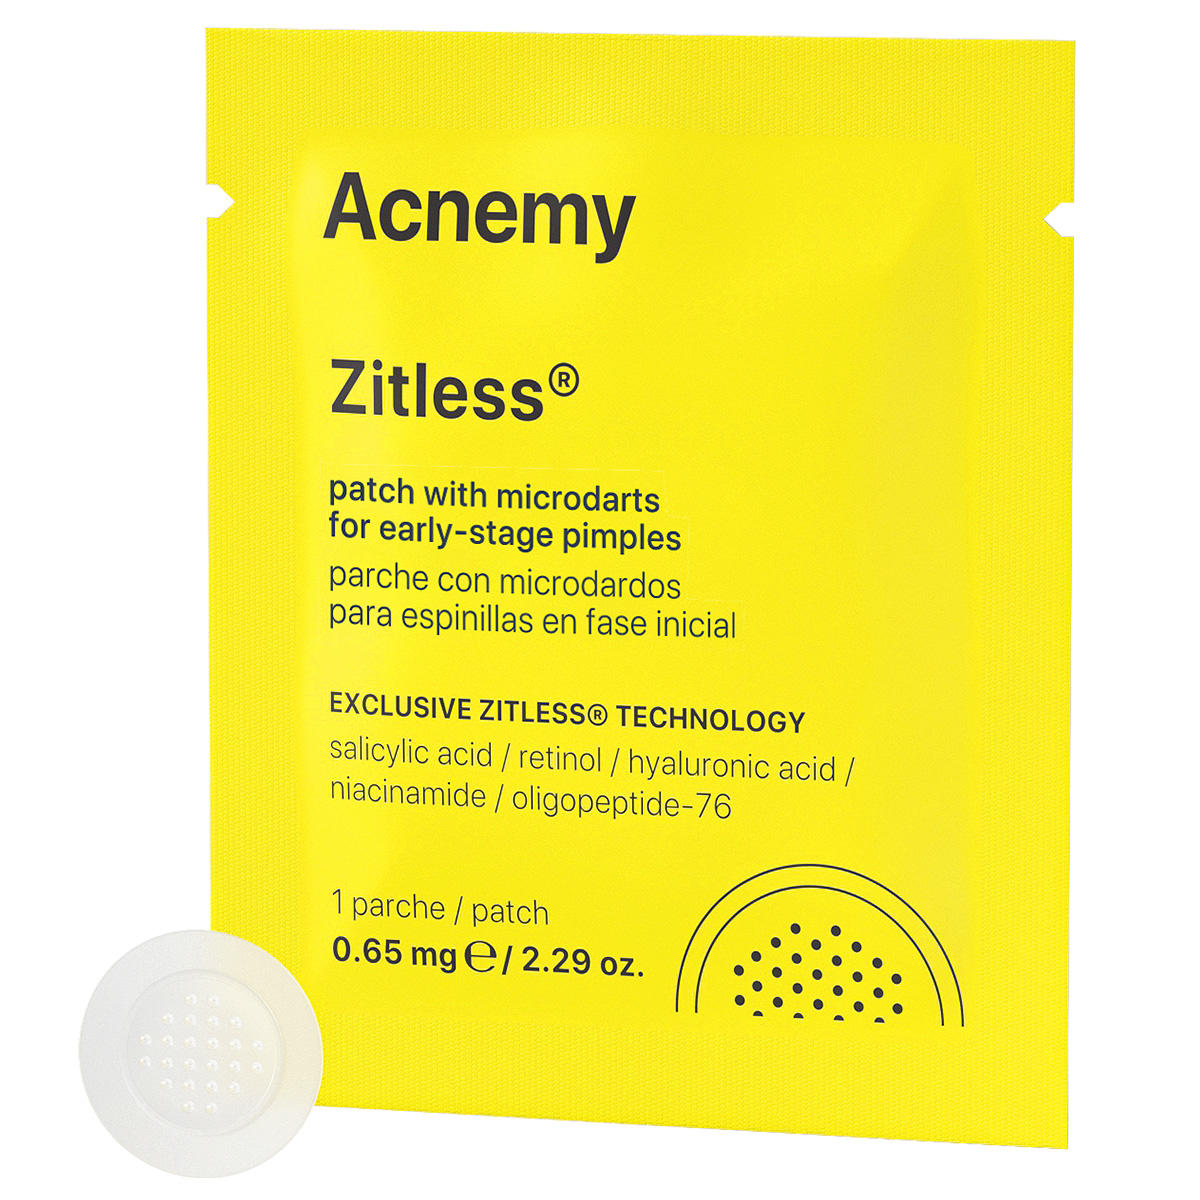 Acnemy ZITLESS patches with microdarts 5 Stück - 2